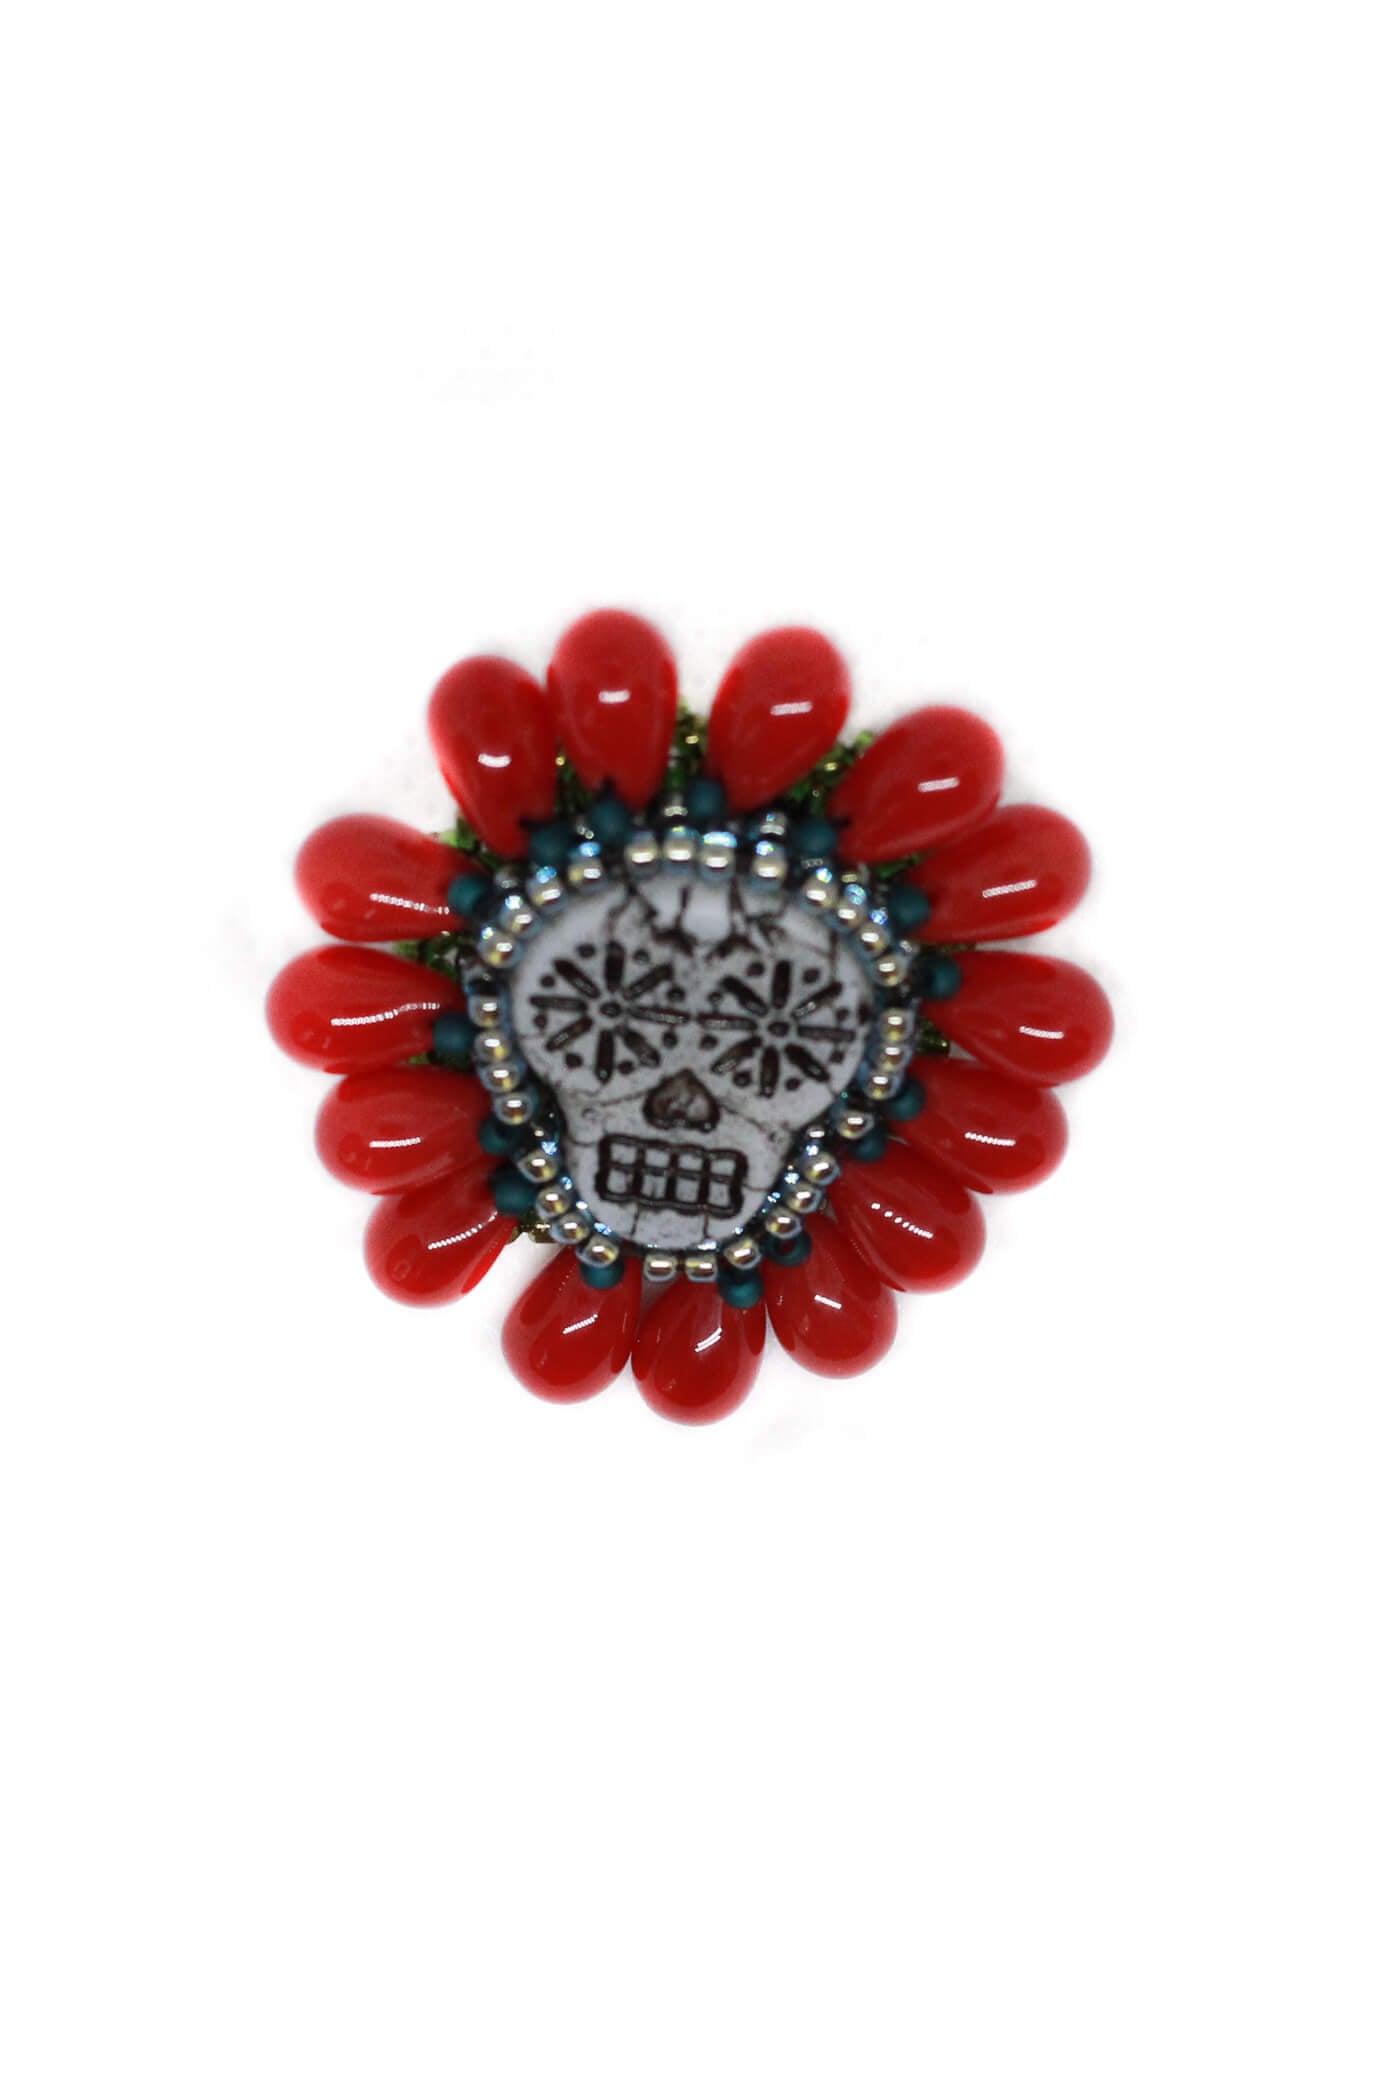 Day Of The Dead - Sugar Skull Brooch by Kaleidoscopes And Polka Dots